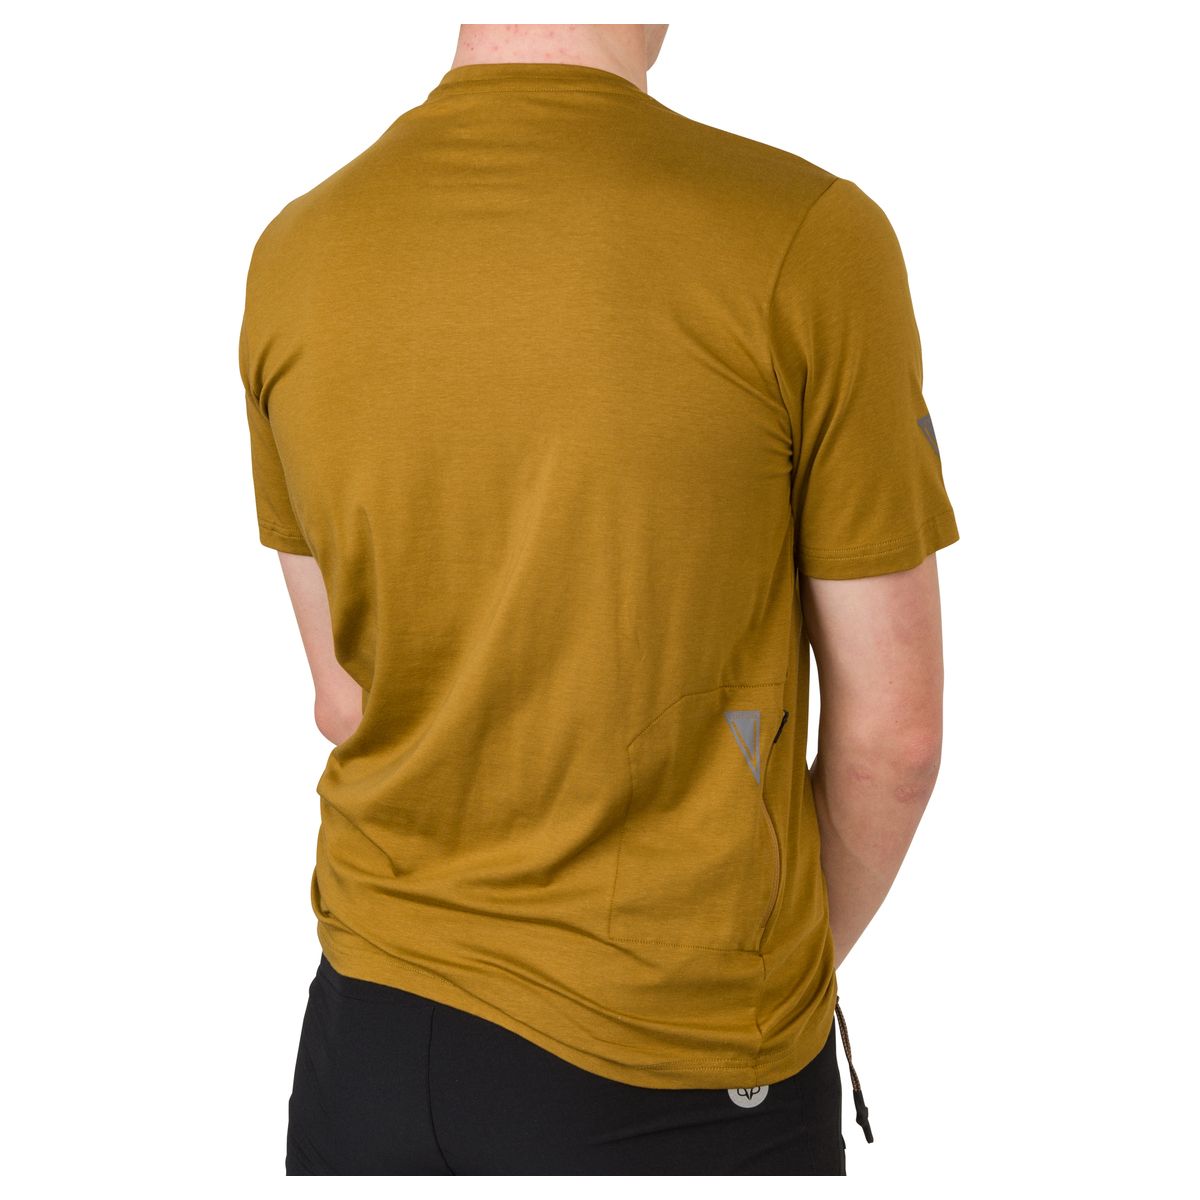 Performance T-shirt Venture fit example